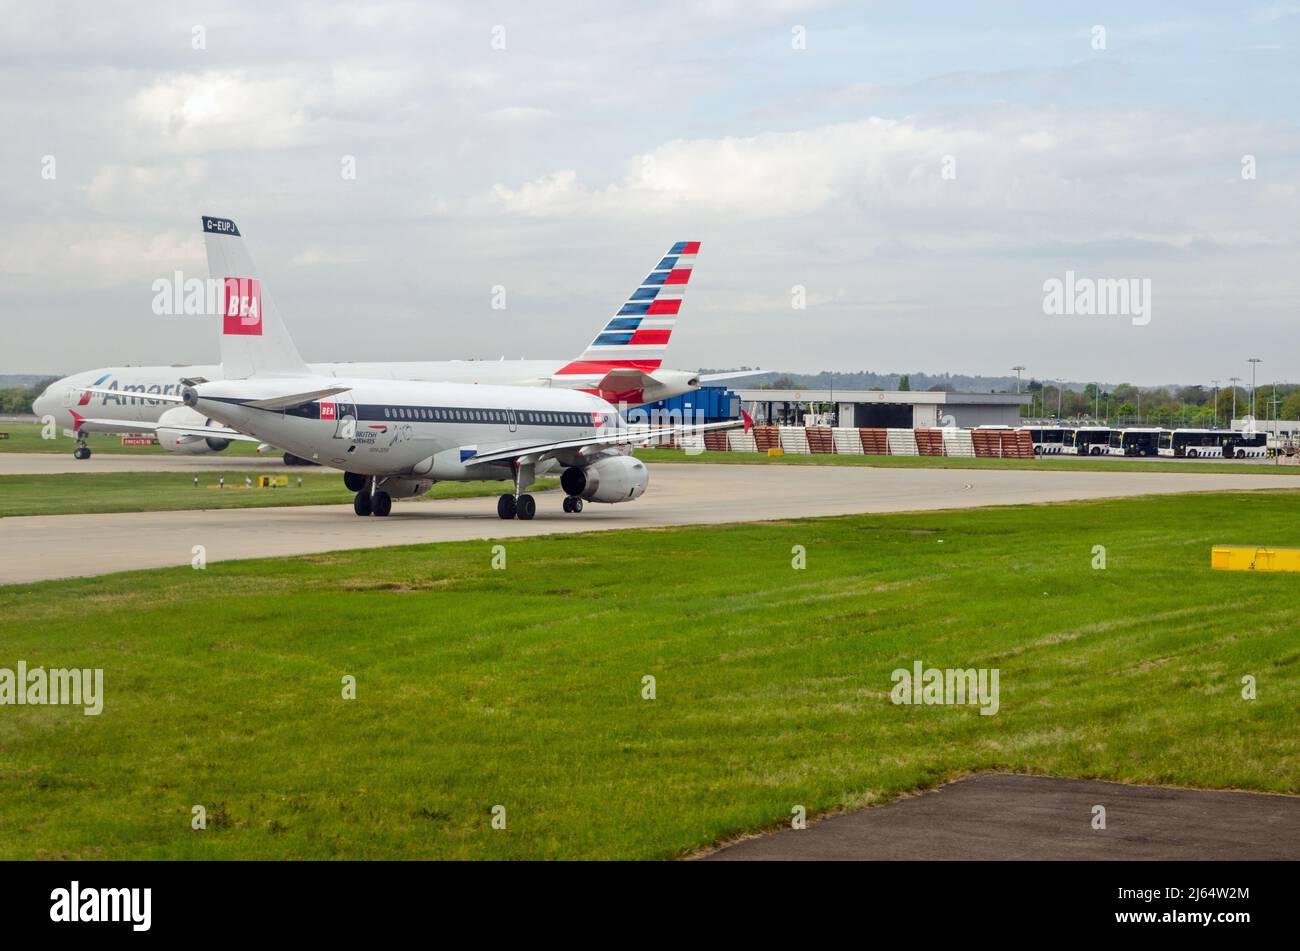 London, UK - April 19, 2022: A British Airways Airbus A319 plane painted in the heritage colours of the old BEA airline to mark the airline's centenar Stock Photo